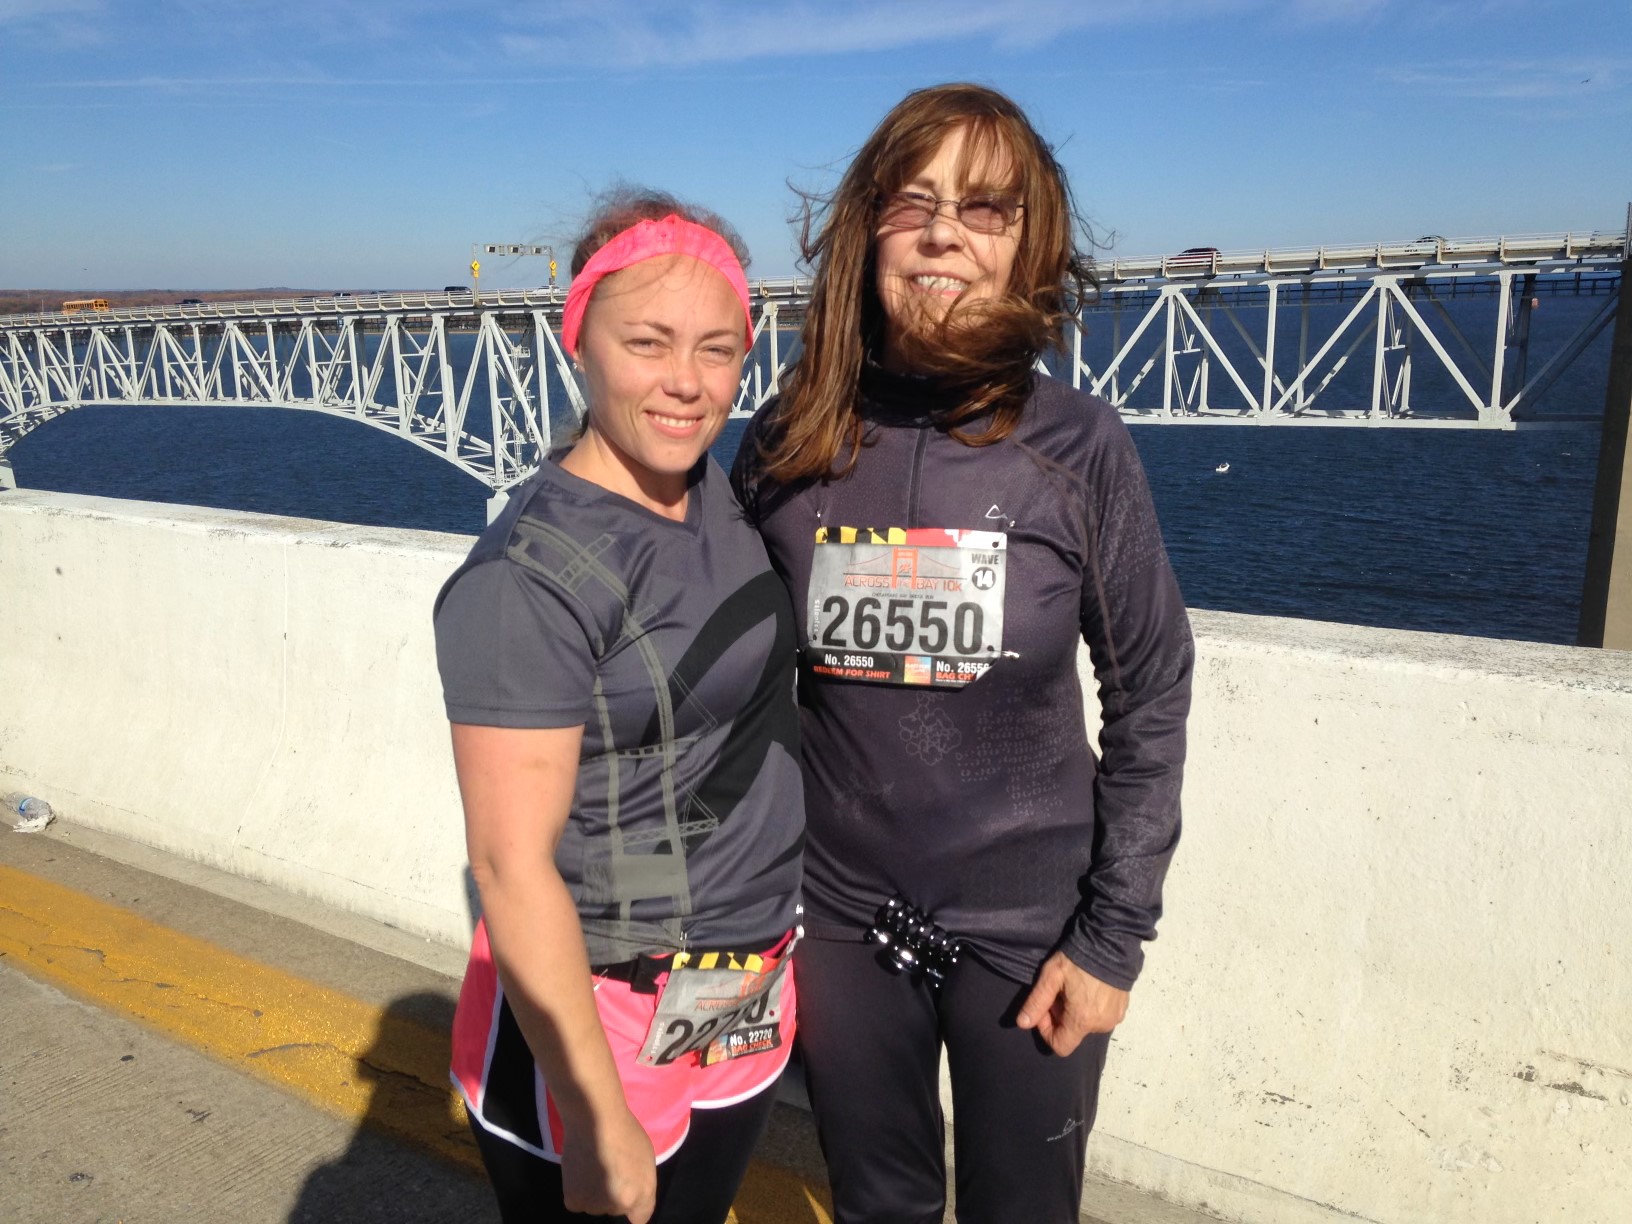 Ms. Irving completed the Across the Bay 10k, racing over the Chesapeake Bay Bridge.